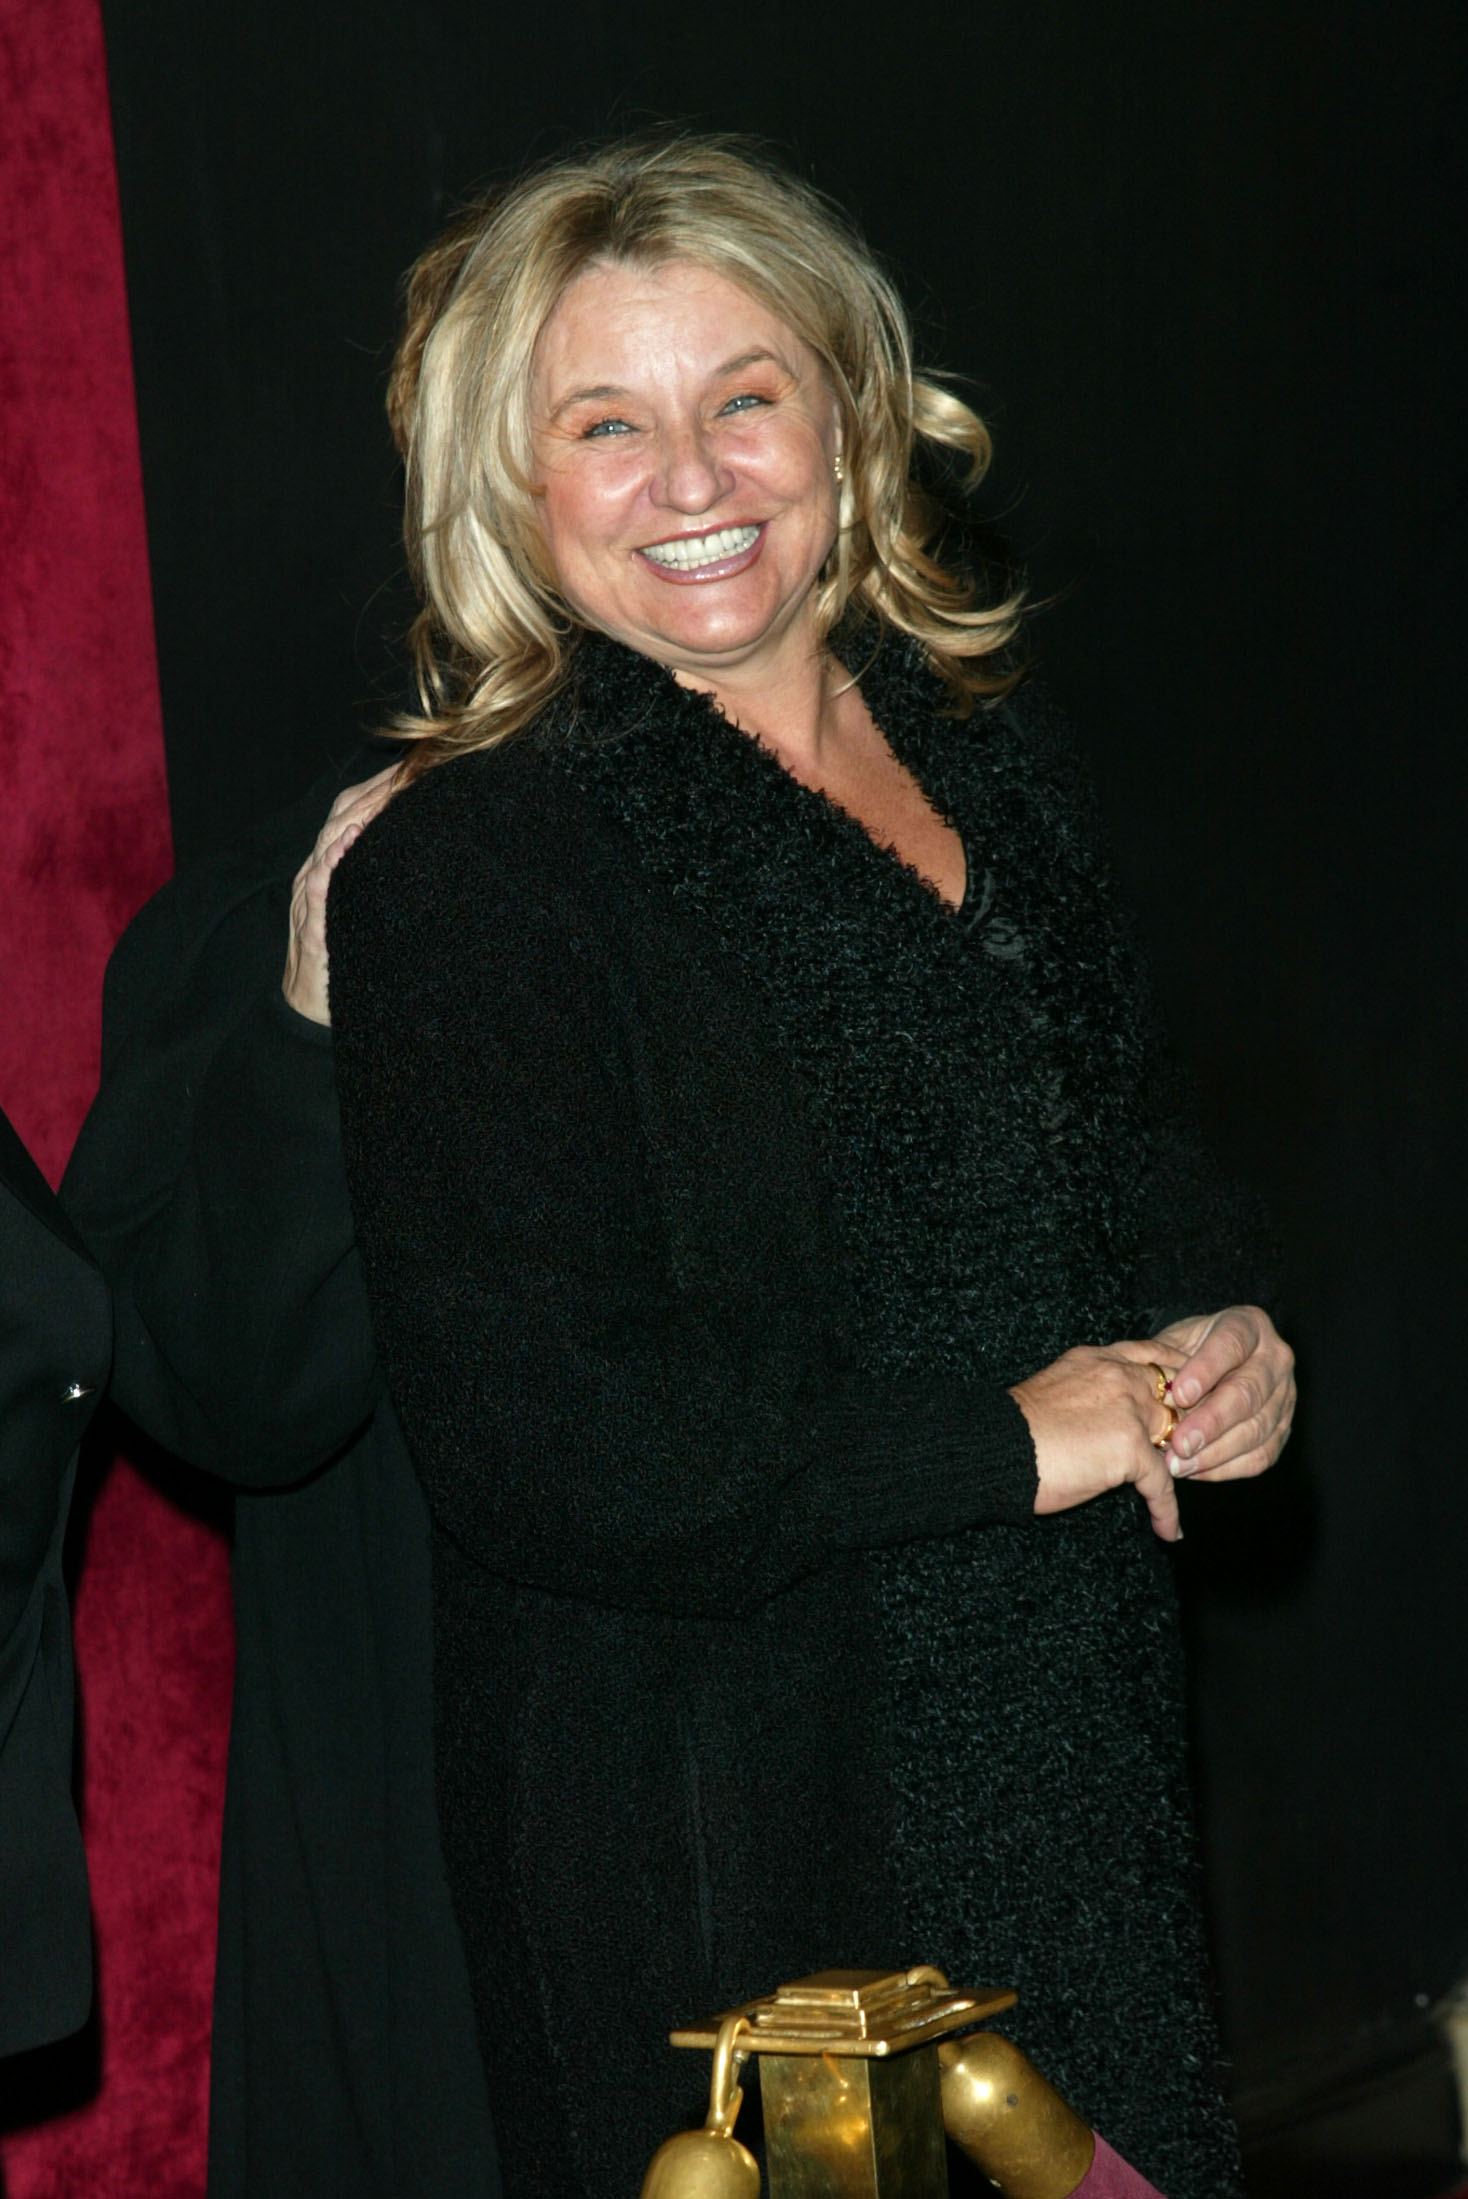 Irmalin Indenbirken arriving at the "Gangs Of New York" world premiere in New York City, on December 9, 2002. | Source: Getty Images